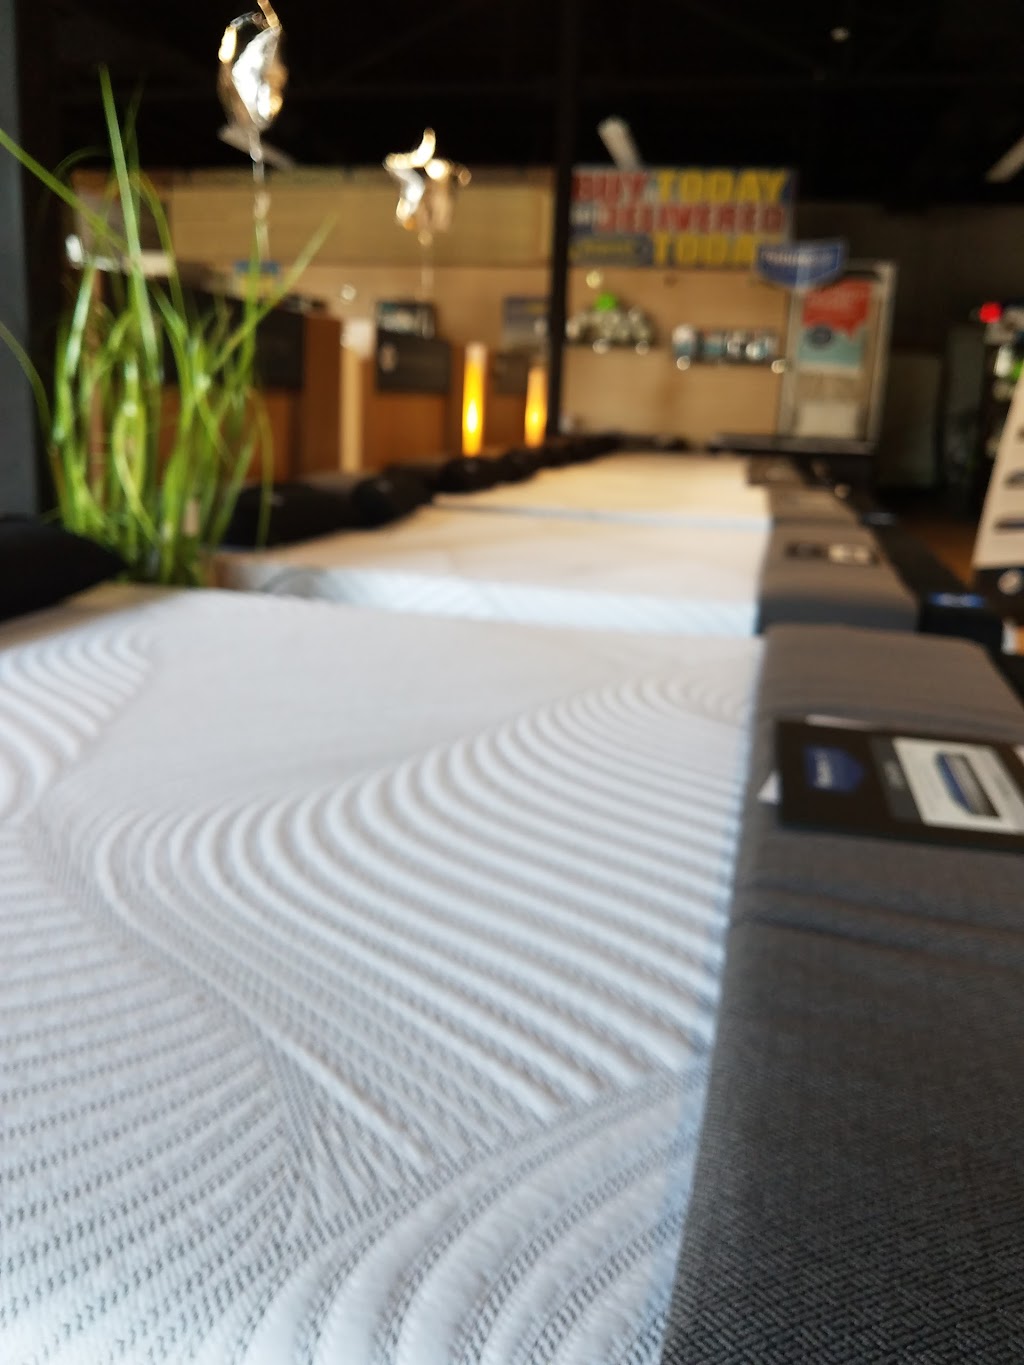 Woodstock Mattress Outlet | 2249 Cumming Hwy Suite 104, Canton, GA 30115, USA | Phone: (770) 345-2047